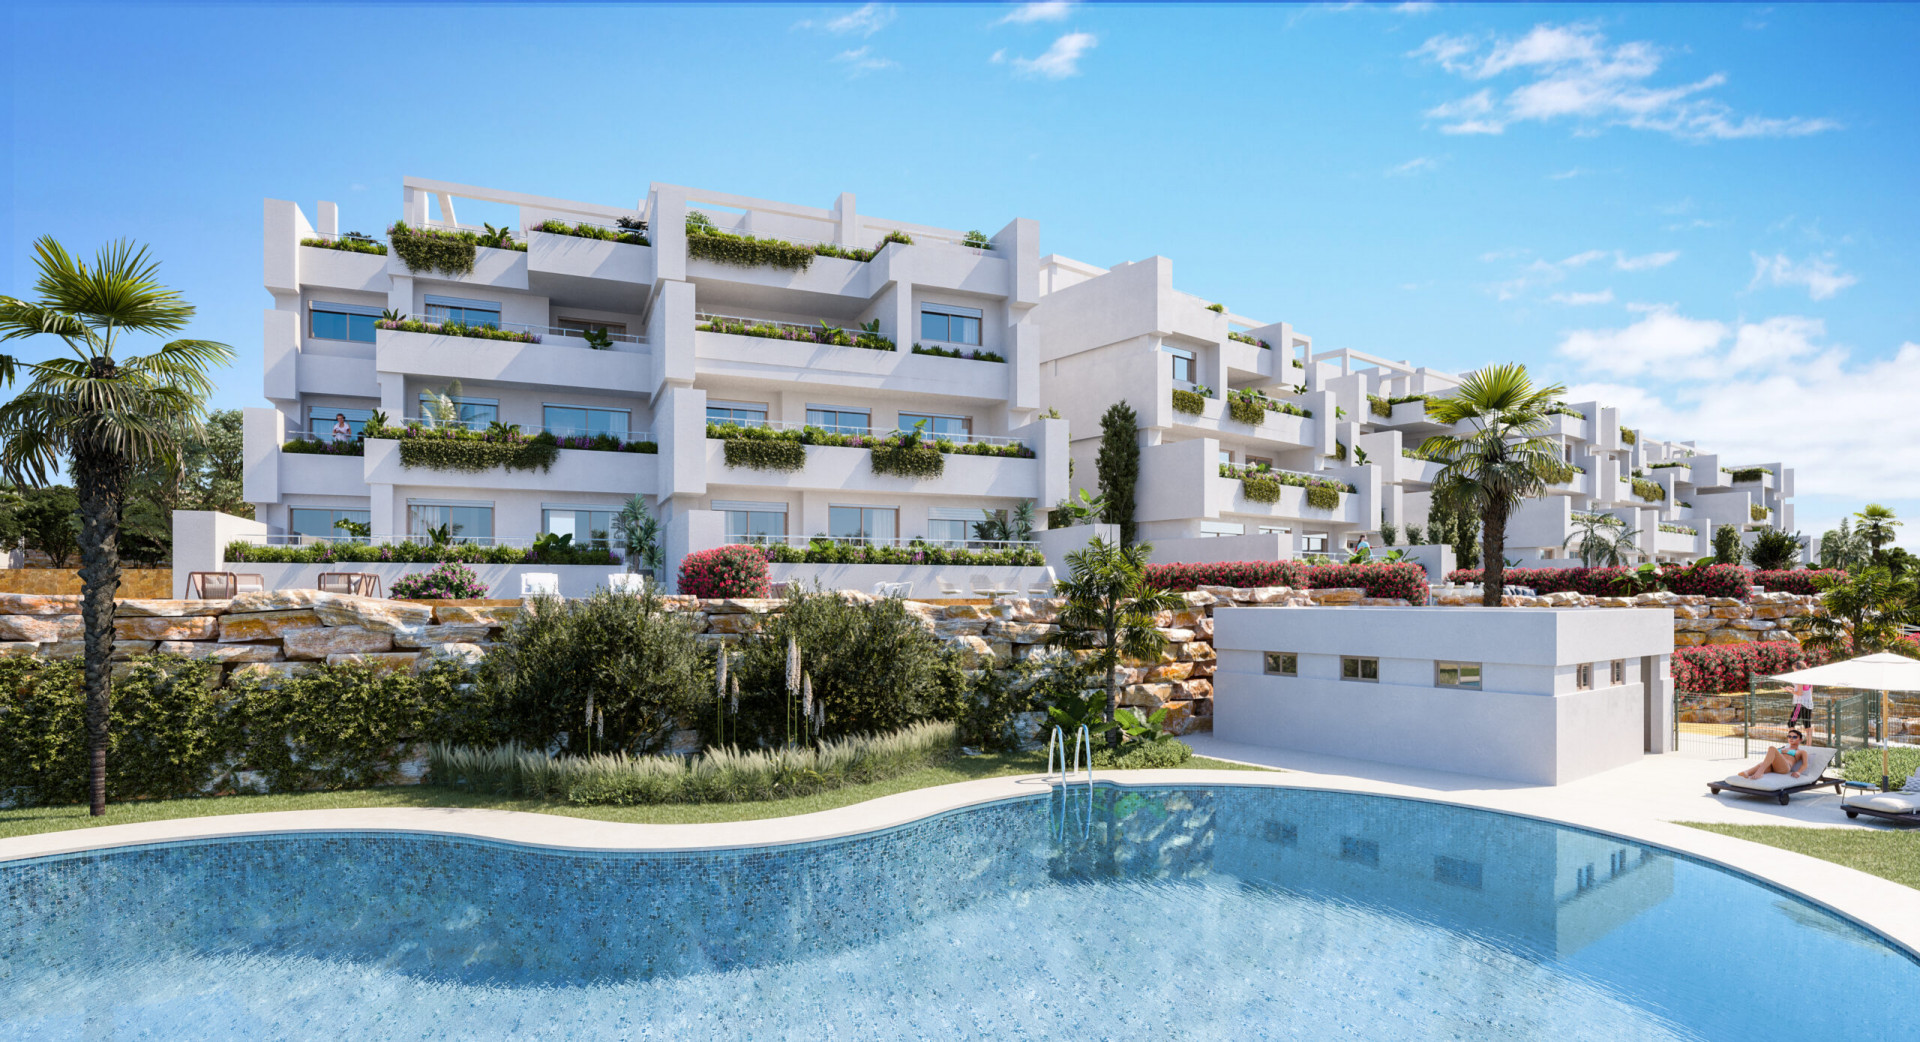 Two bedroom flat with views in a privileged setting in Estepona.